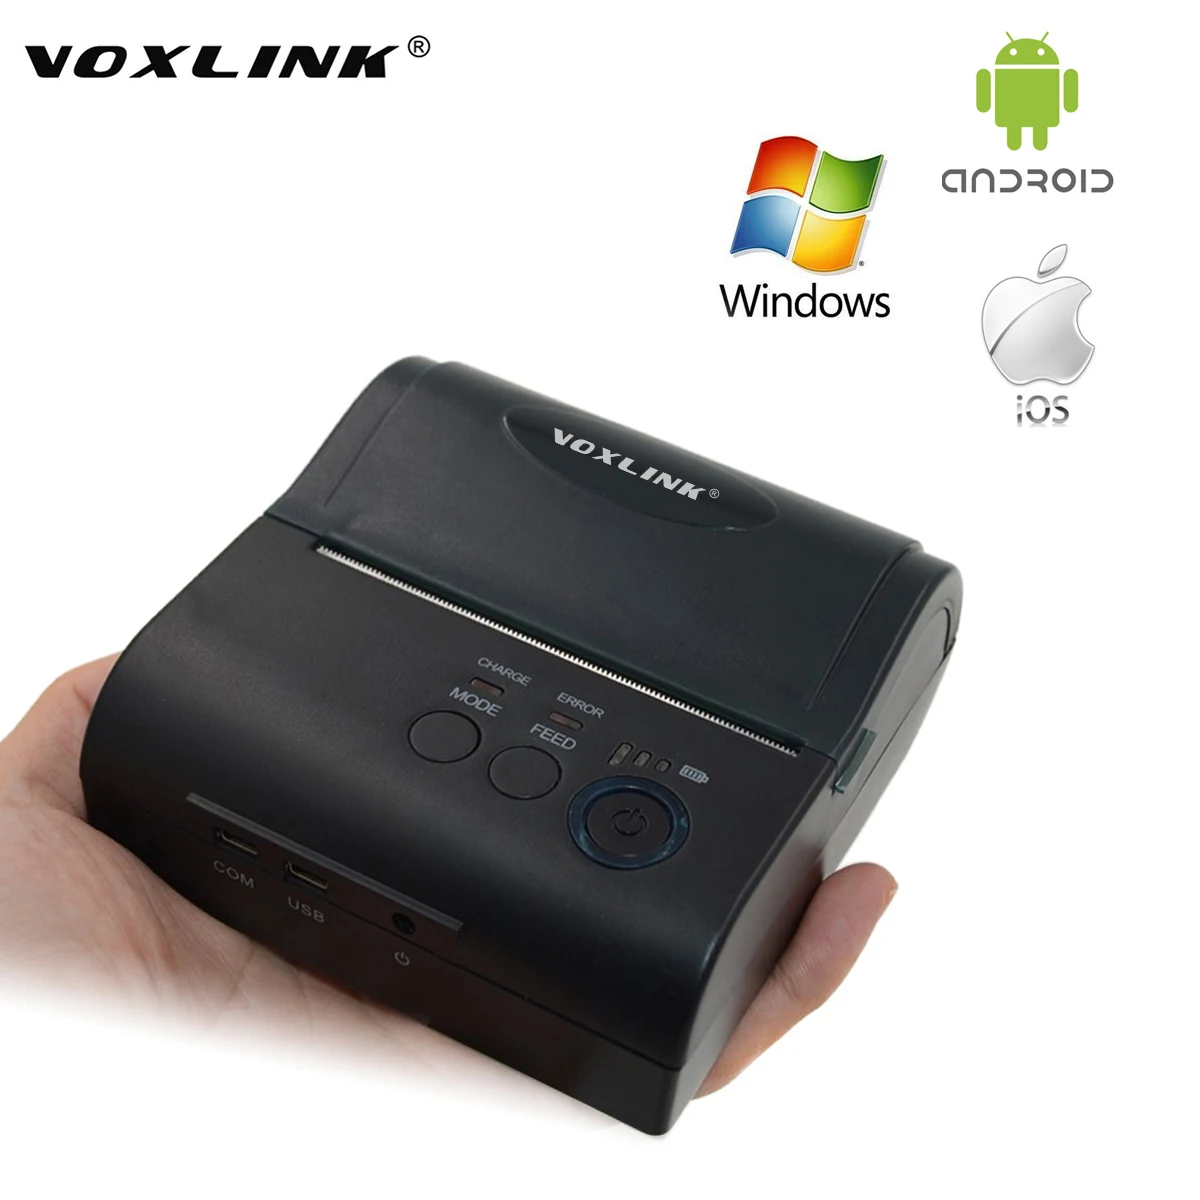 Protable 80MM Thermal Bluetooth Receipt Printer,Wireless Bluetooth Printer for IOS Android Windows